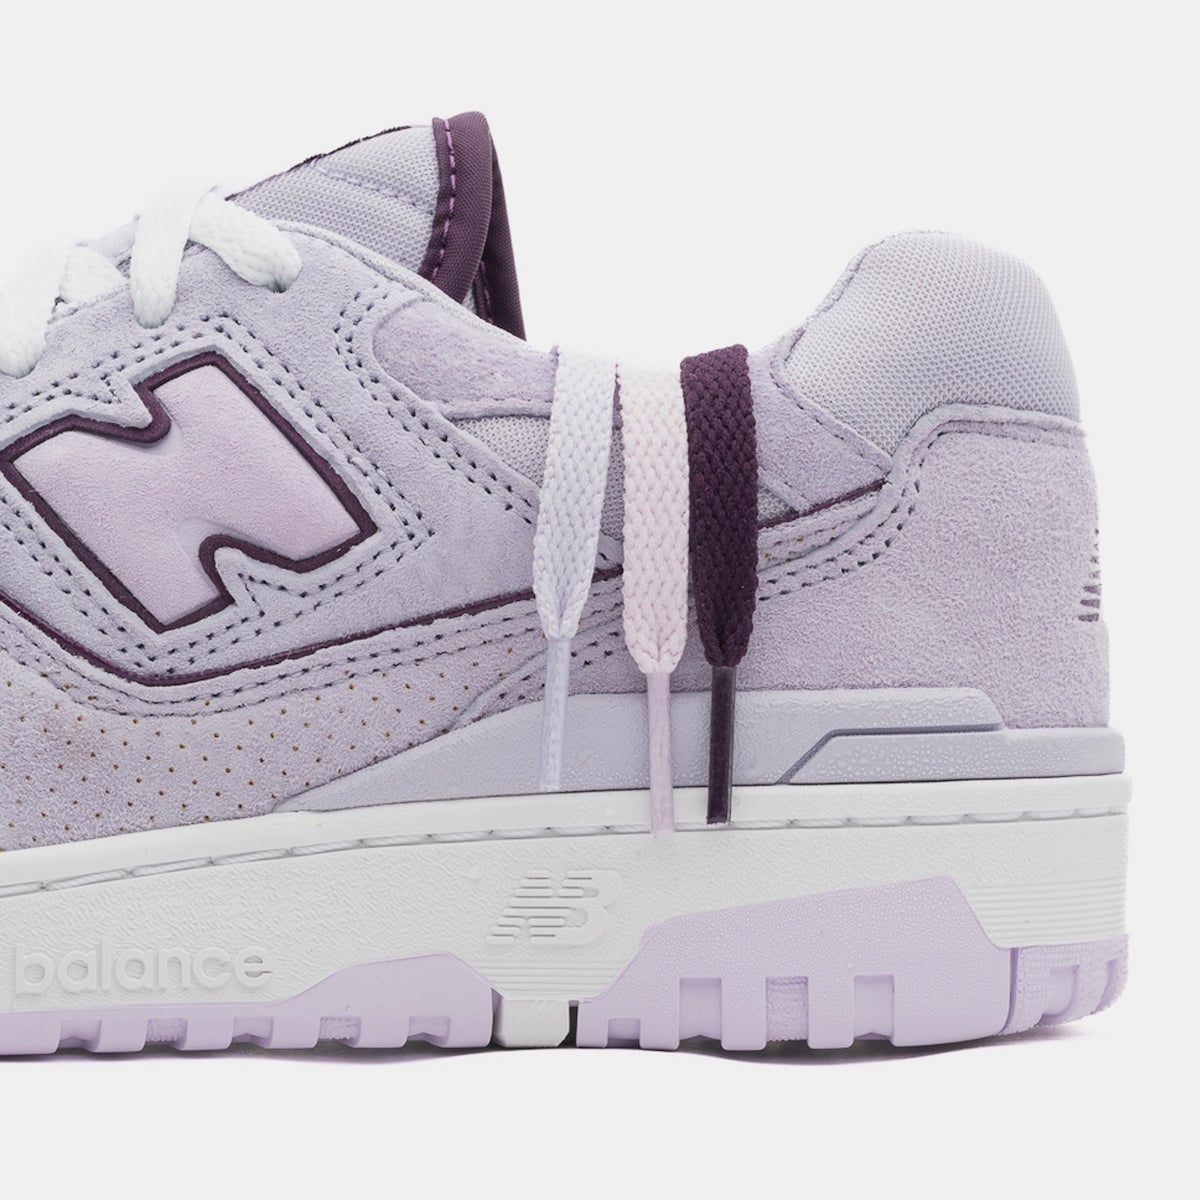 Rich Paul x New Balance 550 Forever Yours